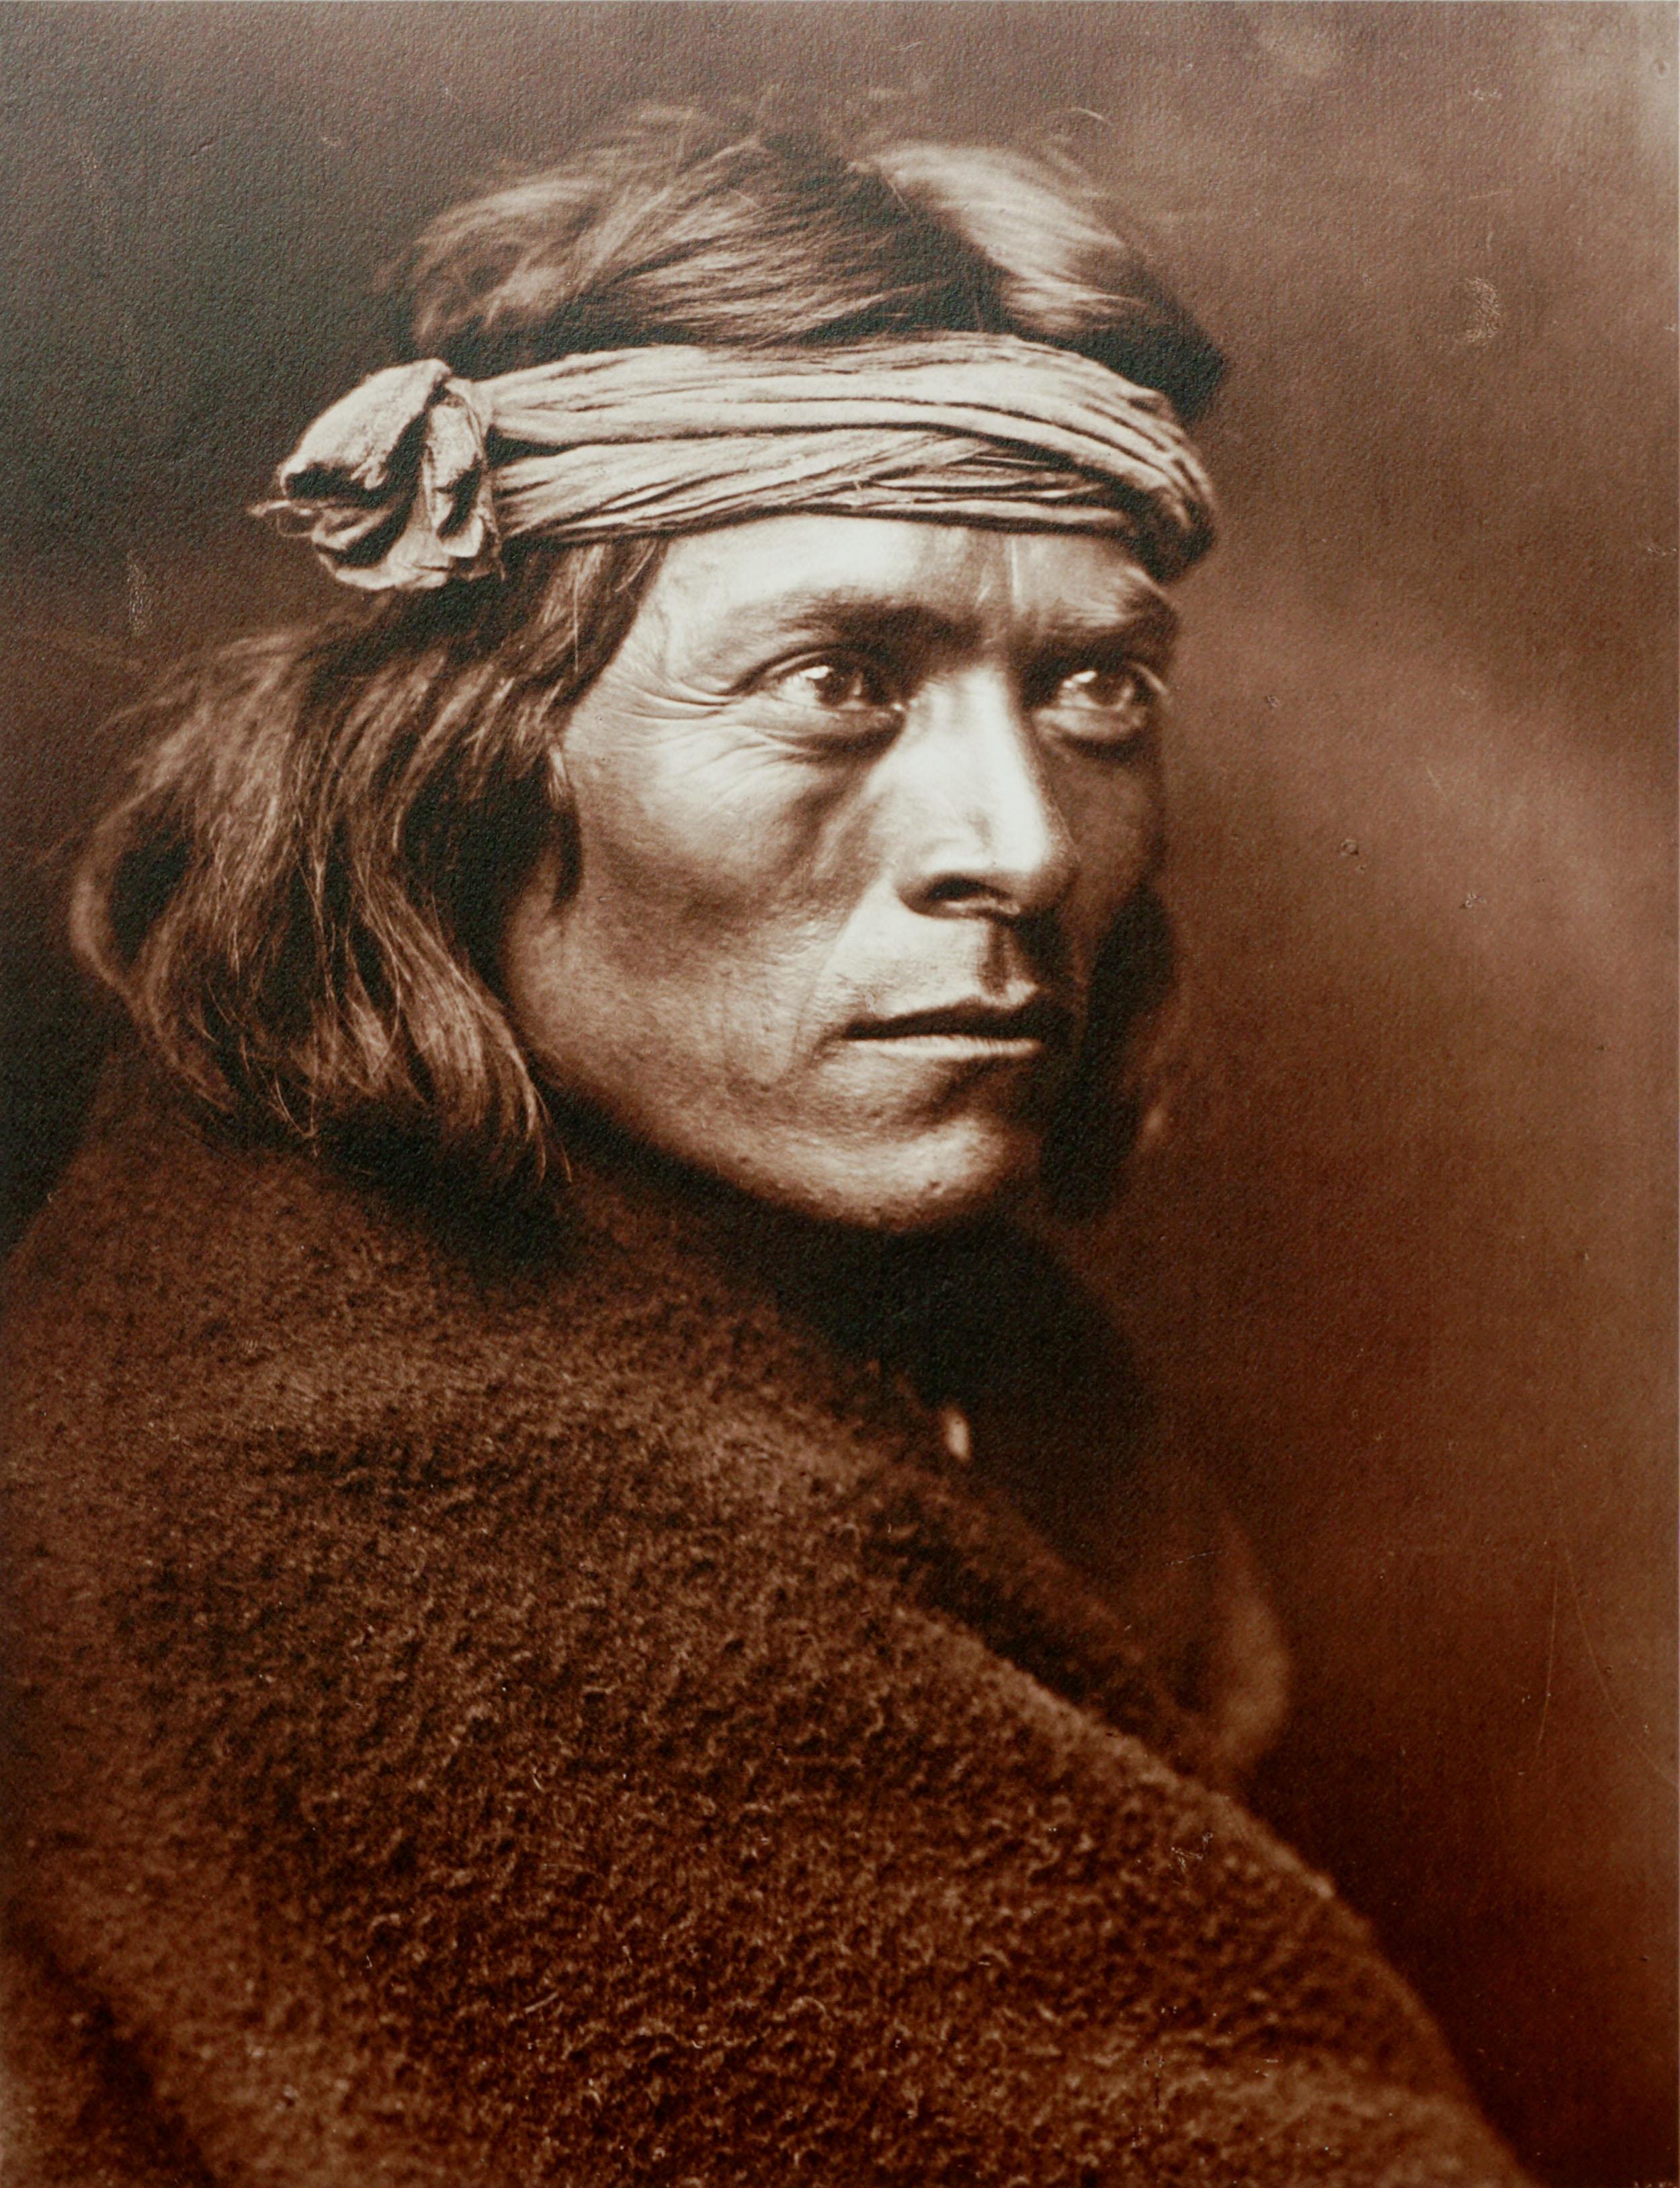 Zuni Governor - Photograph by Edward Sheriff Curtis